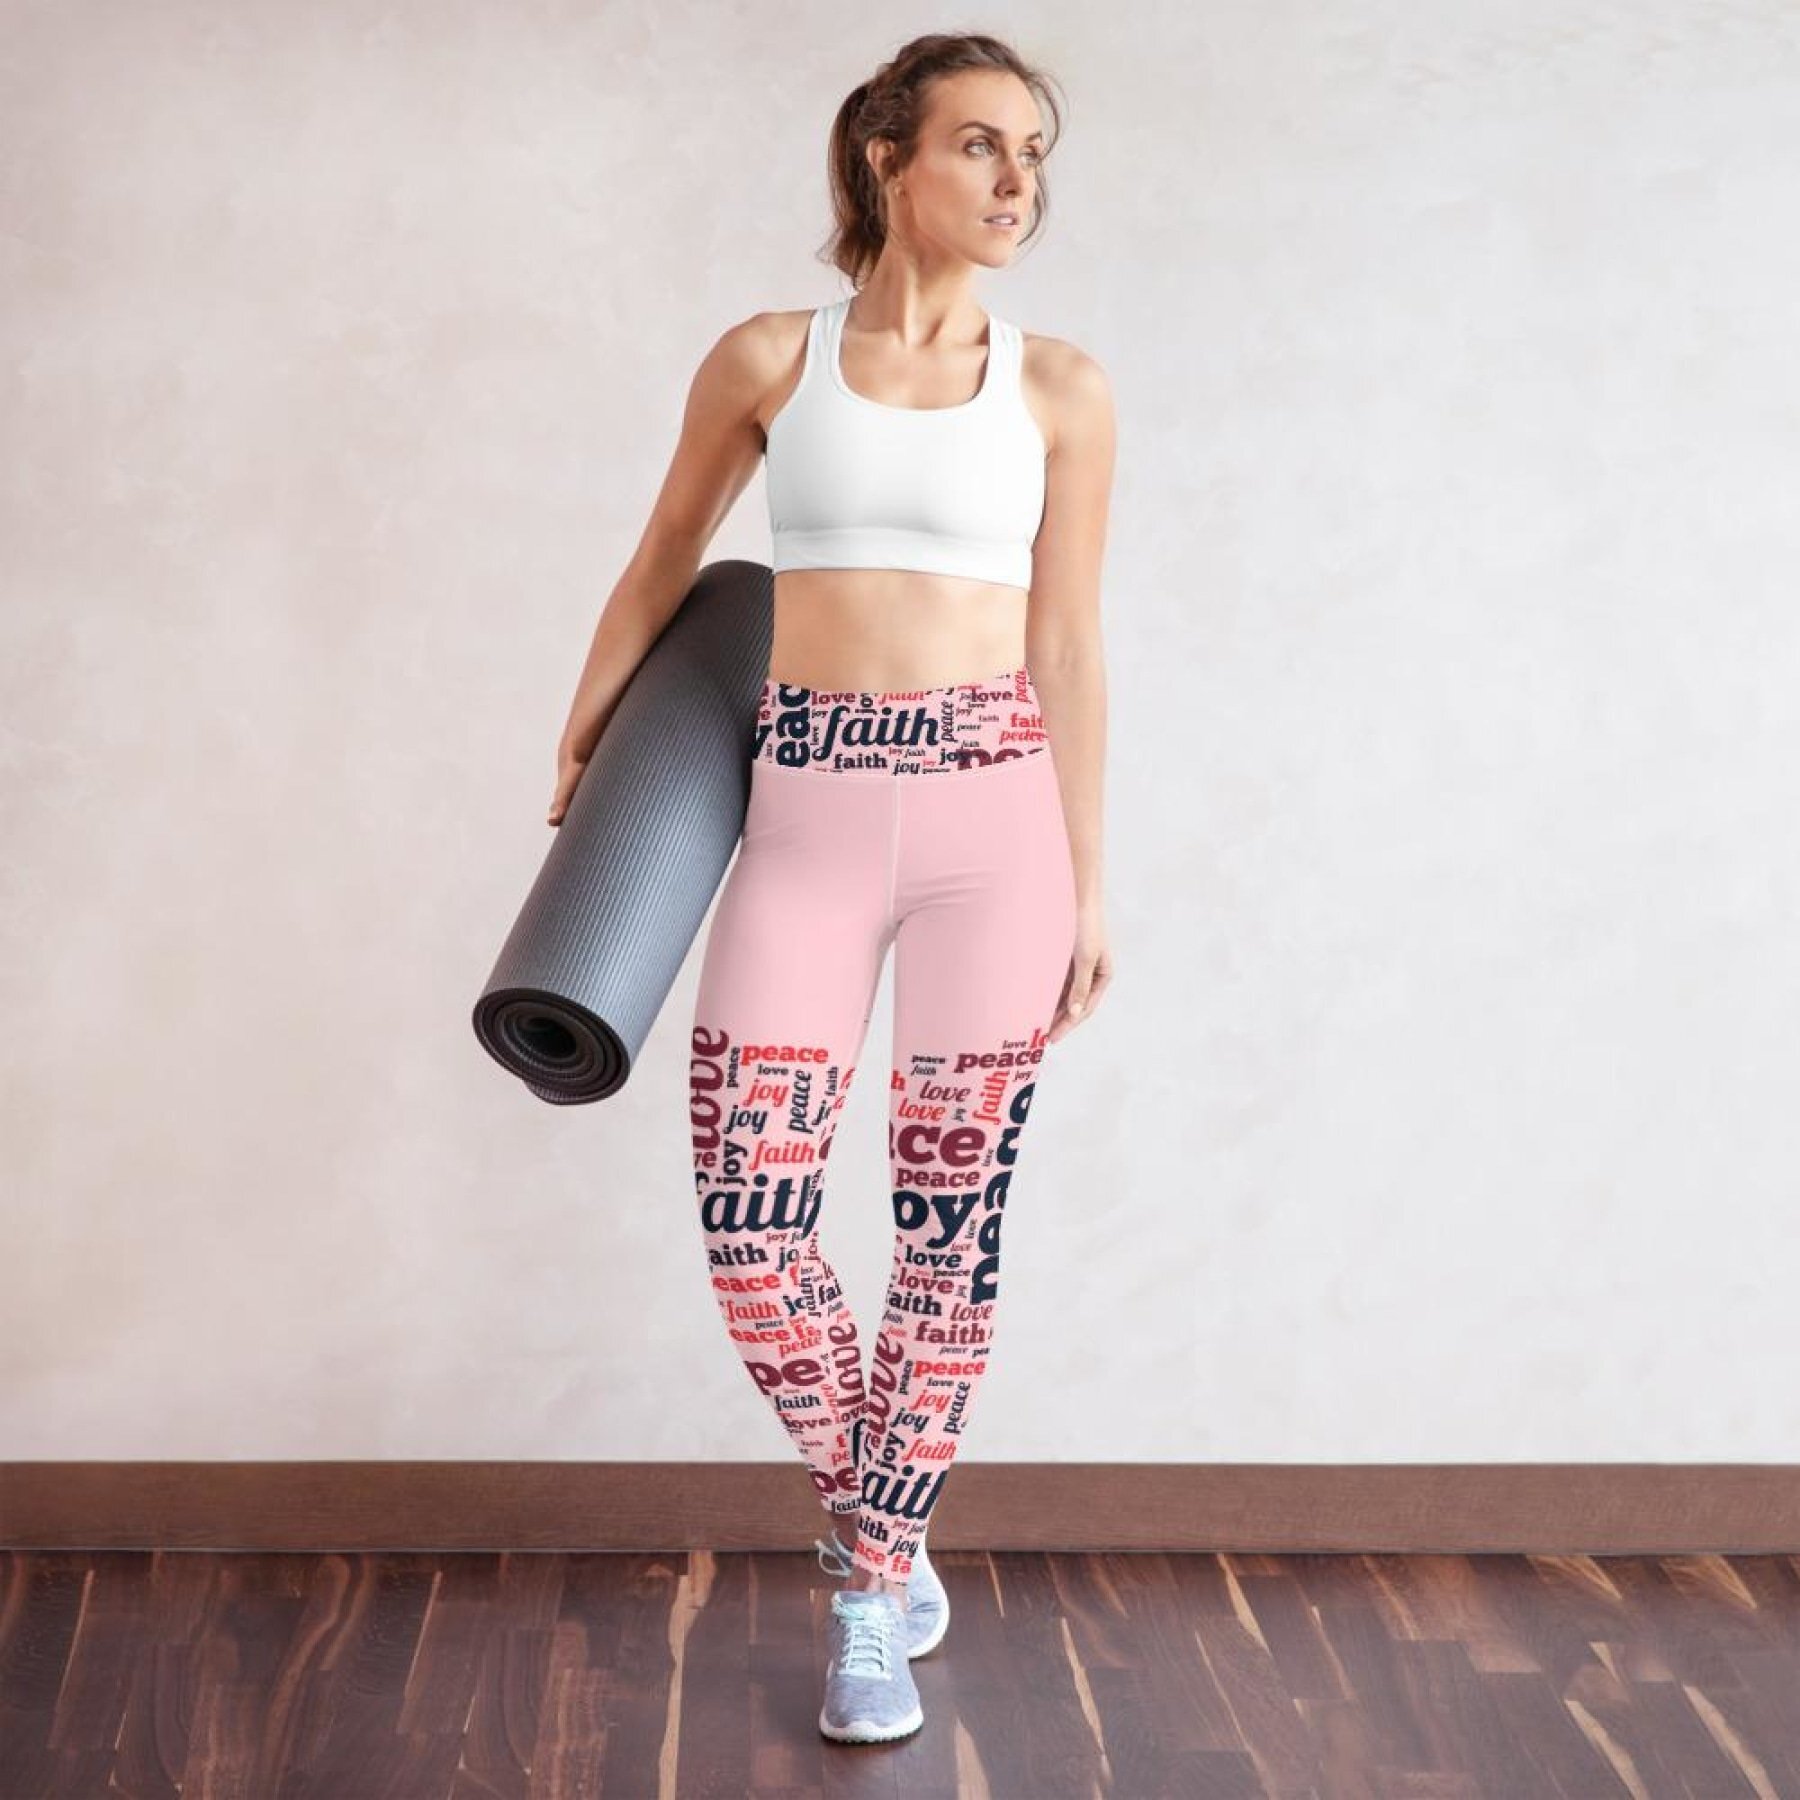 Womens Athletic Pants, Peace Love Joy Faith Graphic Style Pink Yoga Leggings  - Youarrived